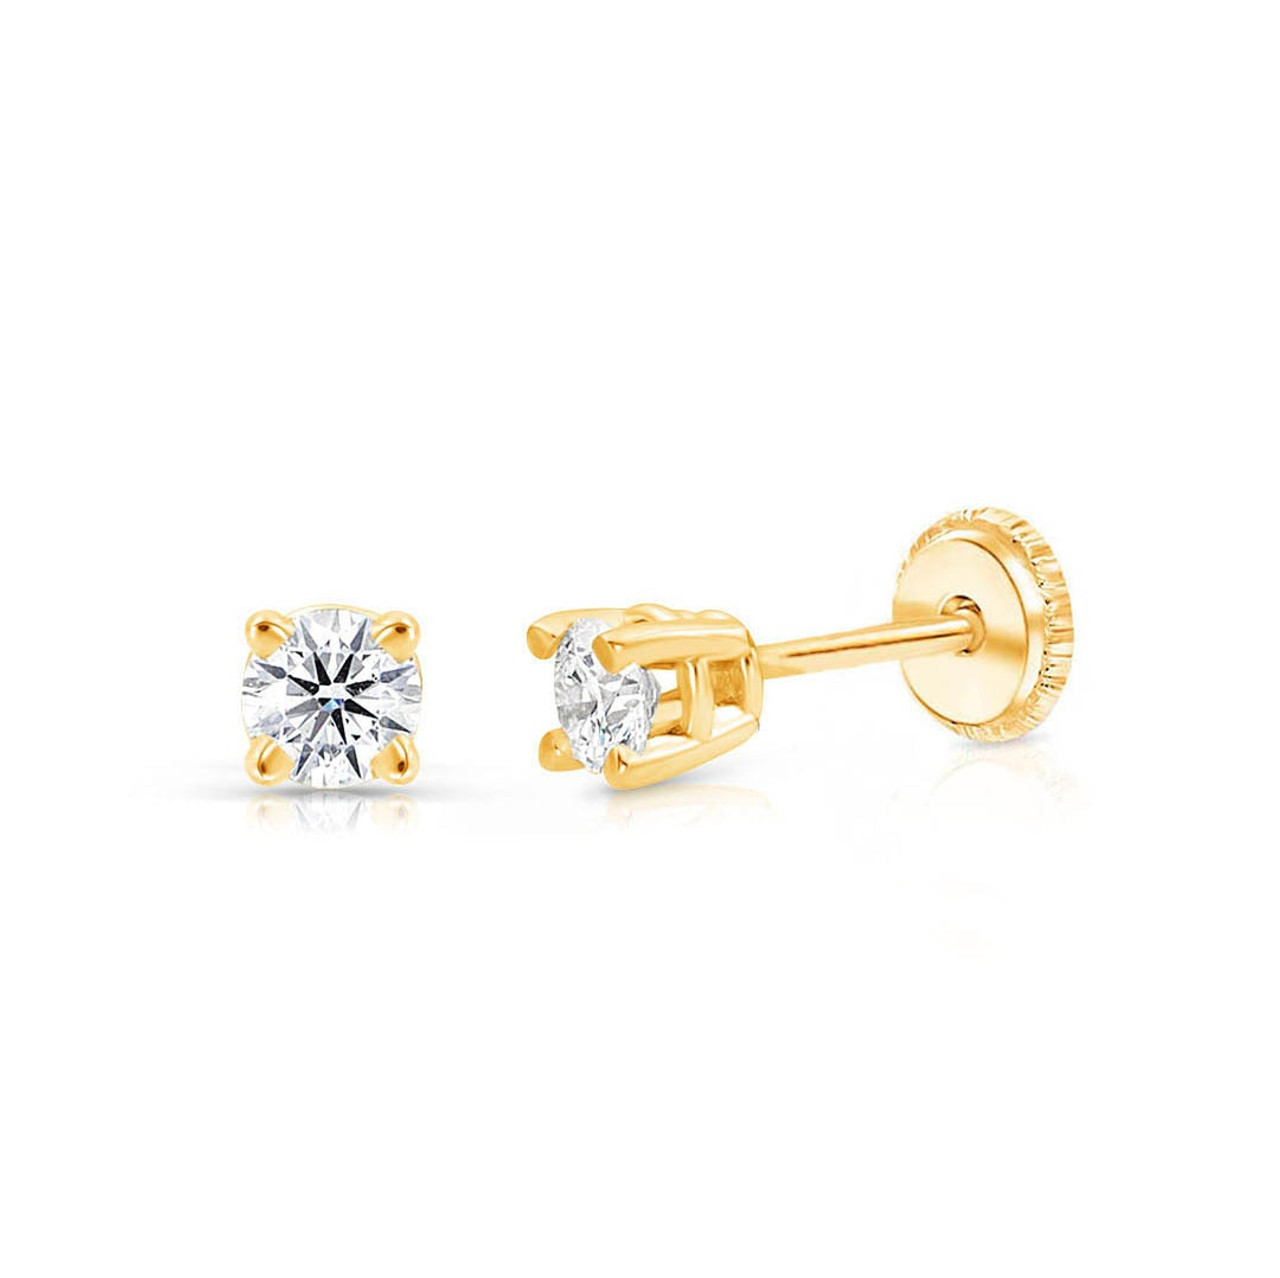 Buy Vanna Jewels IGI Certified Natural Diamond Rabbit Shape Kids Stud  Earrings. Made in 18K Solid Gold for Baby Girls (White Gold) at Amazon.in